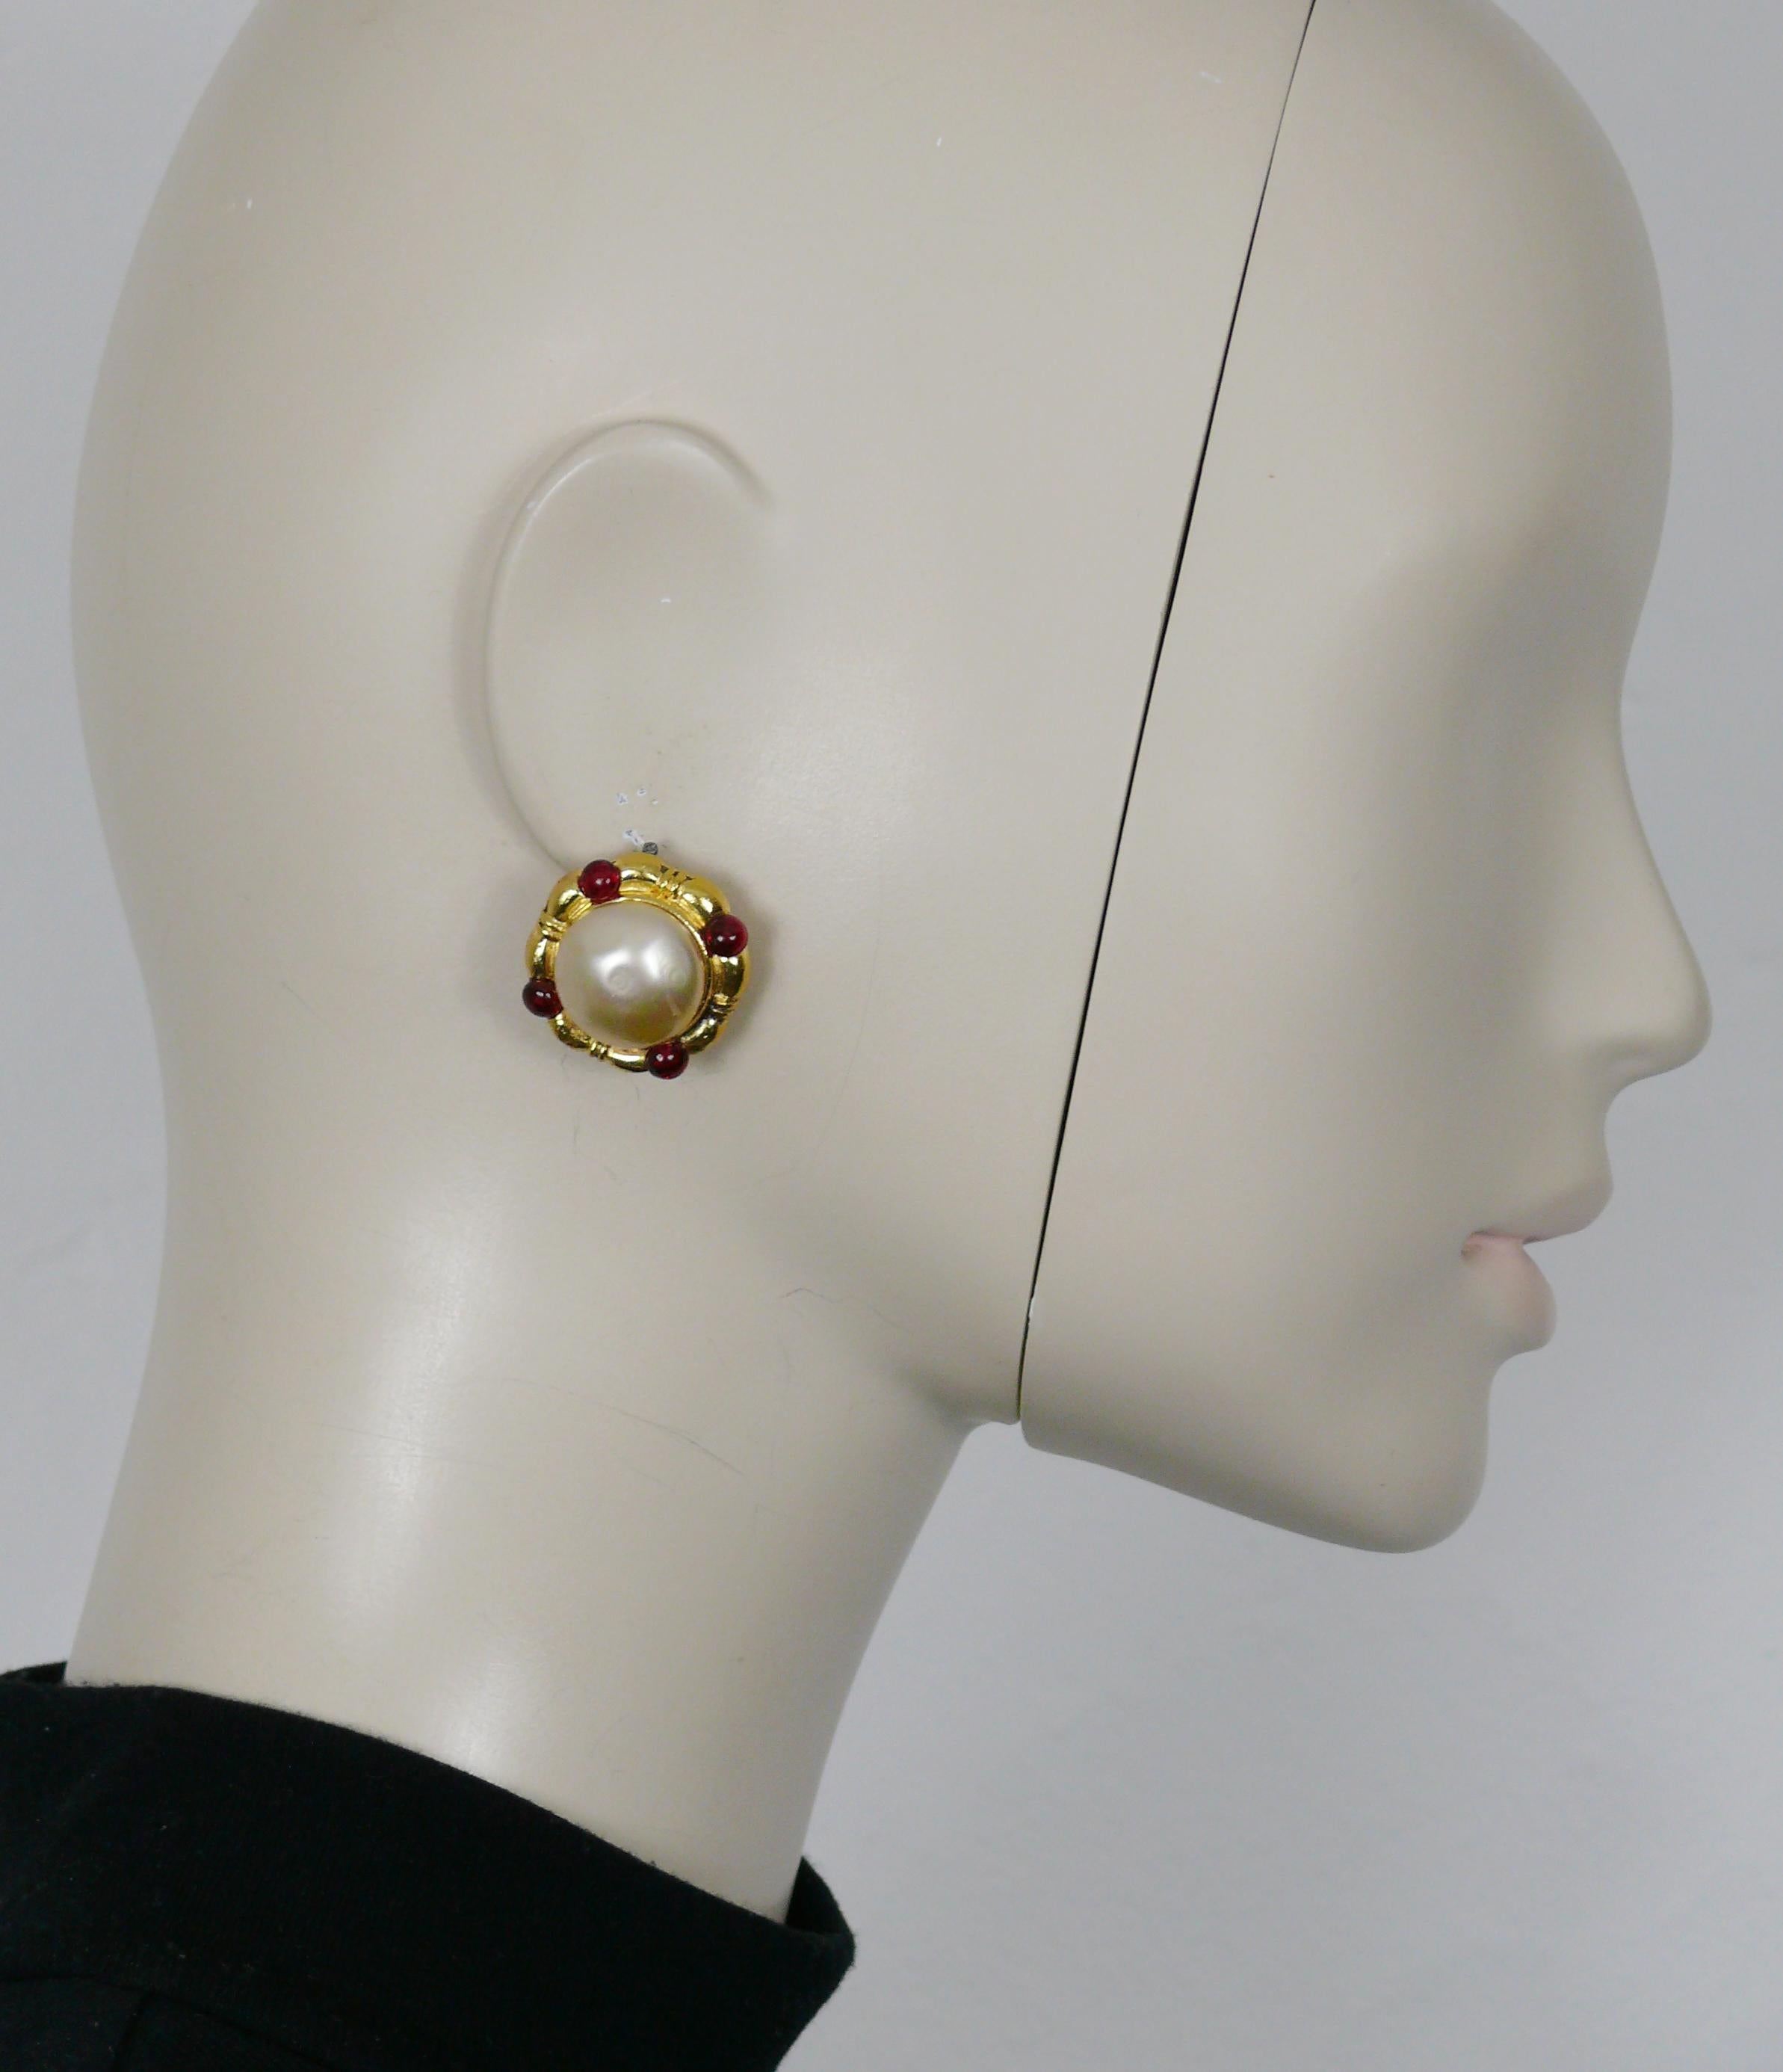 CHANEL vintage gold tone clip-on earrings embellished with a dome faux pearl adorned by four MAISON GRIPOIX red glass cabochons.

Embossed on one earring CHANEL 1982.
Embossed on the other earring CHANEL Déposé 2023.

Indicative measurements :